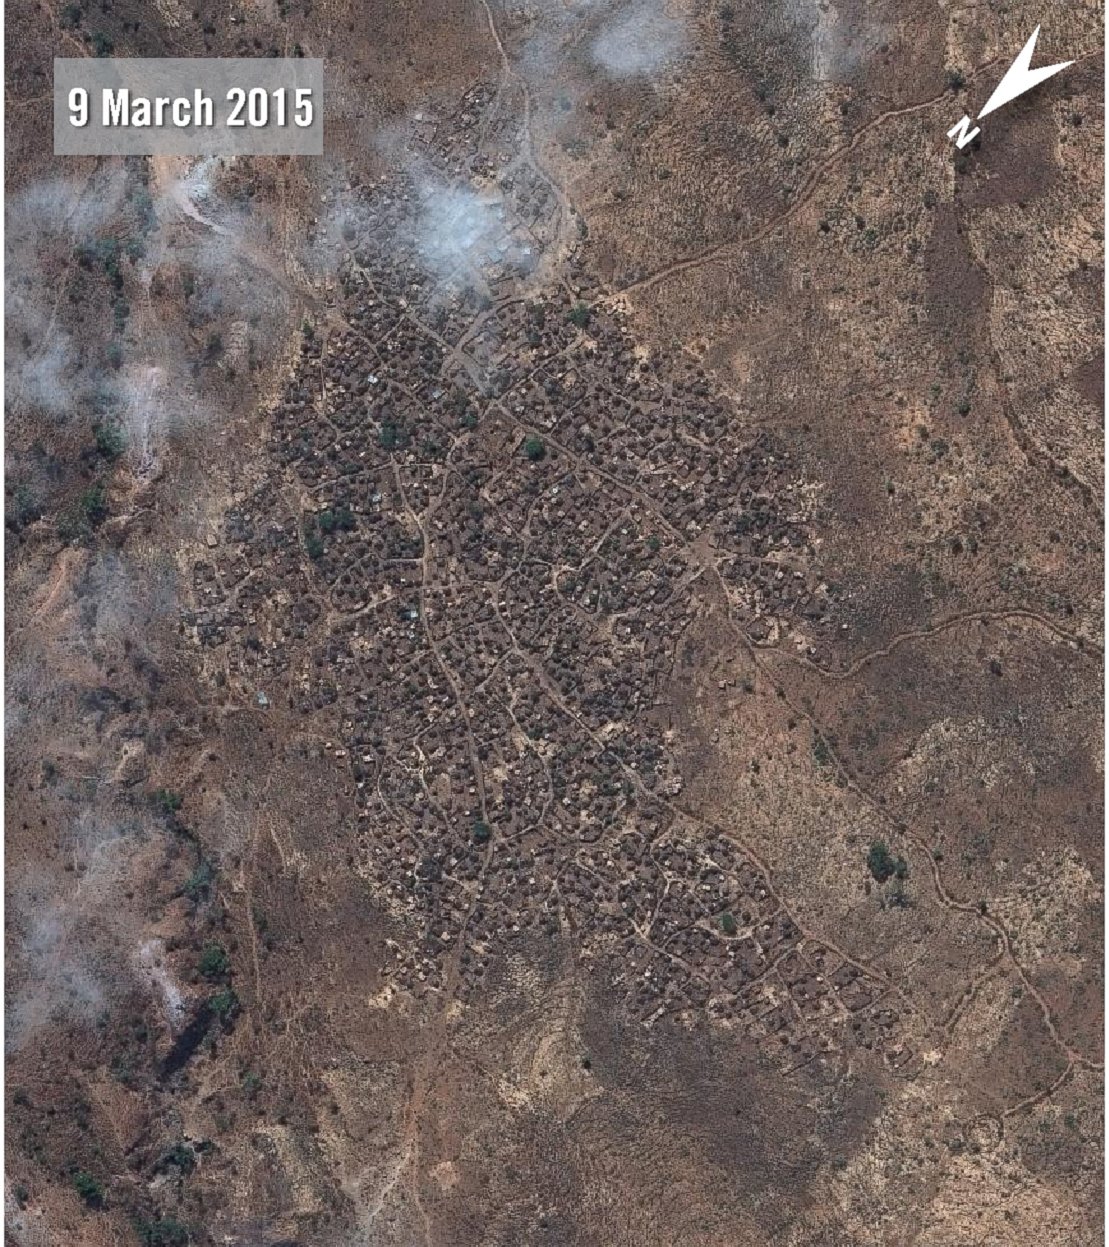 PHOTO: Karmal before - Image from 9 March 2015, shows Karmal village.